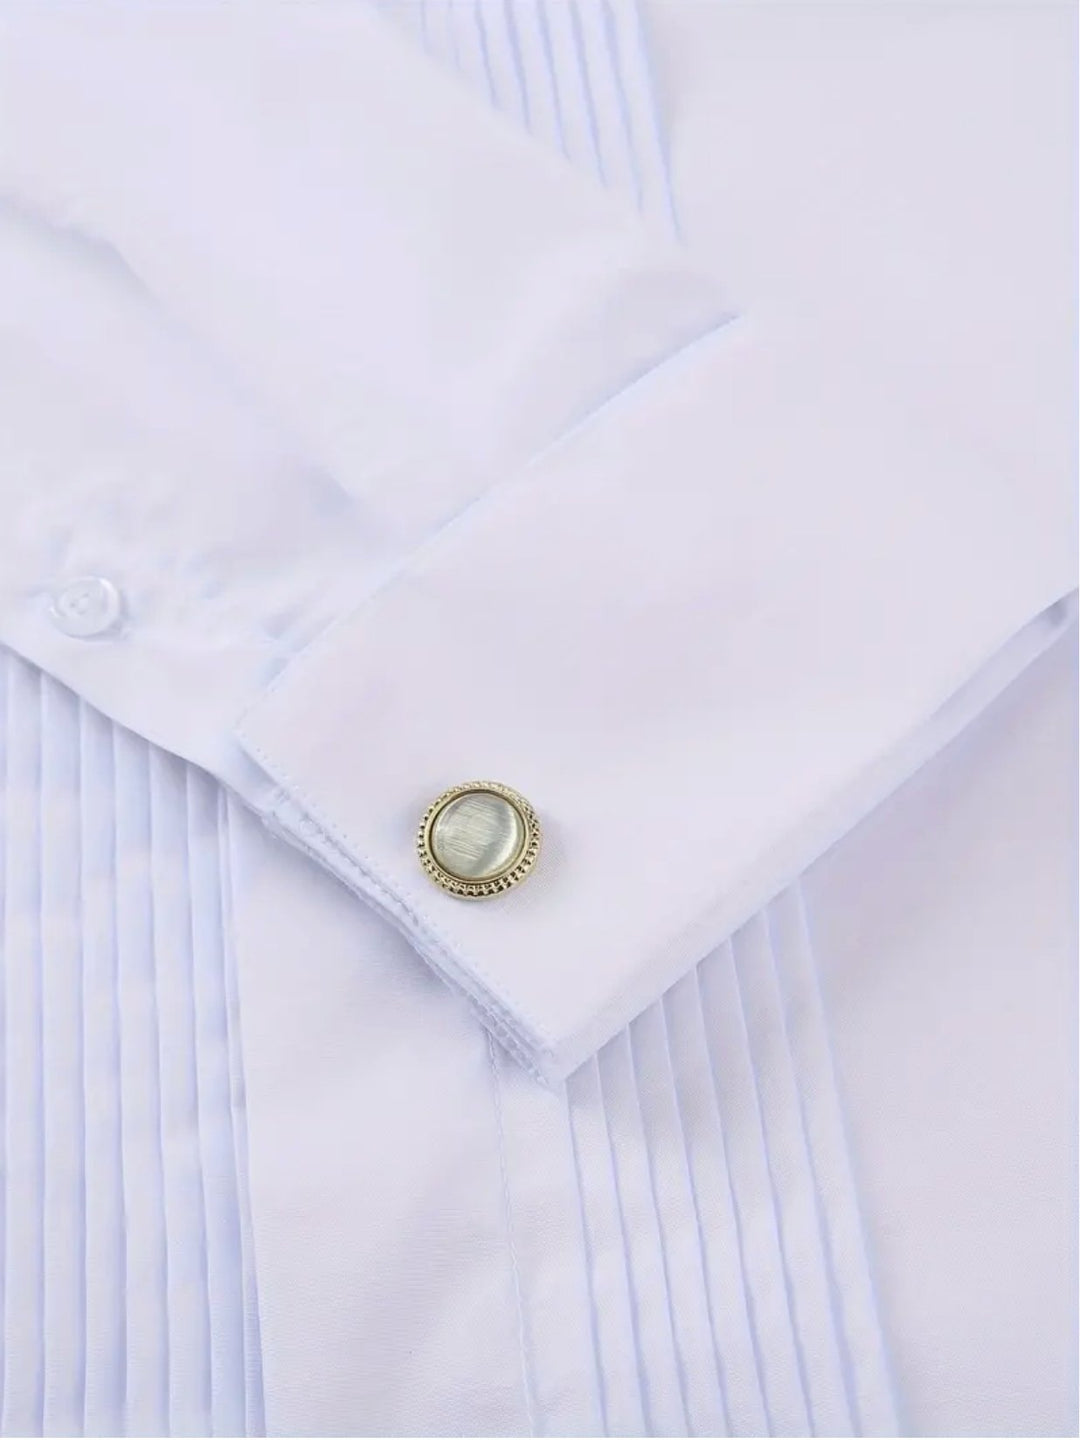 Men's Solid Colour Turndown Collar Dress Shirt For Banquet Wedding Bridesman With Two Ties (One Black And One Red) And With Random Cufflinks - YK37622 - SimonVon Shop